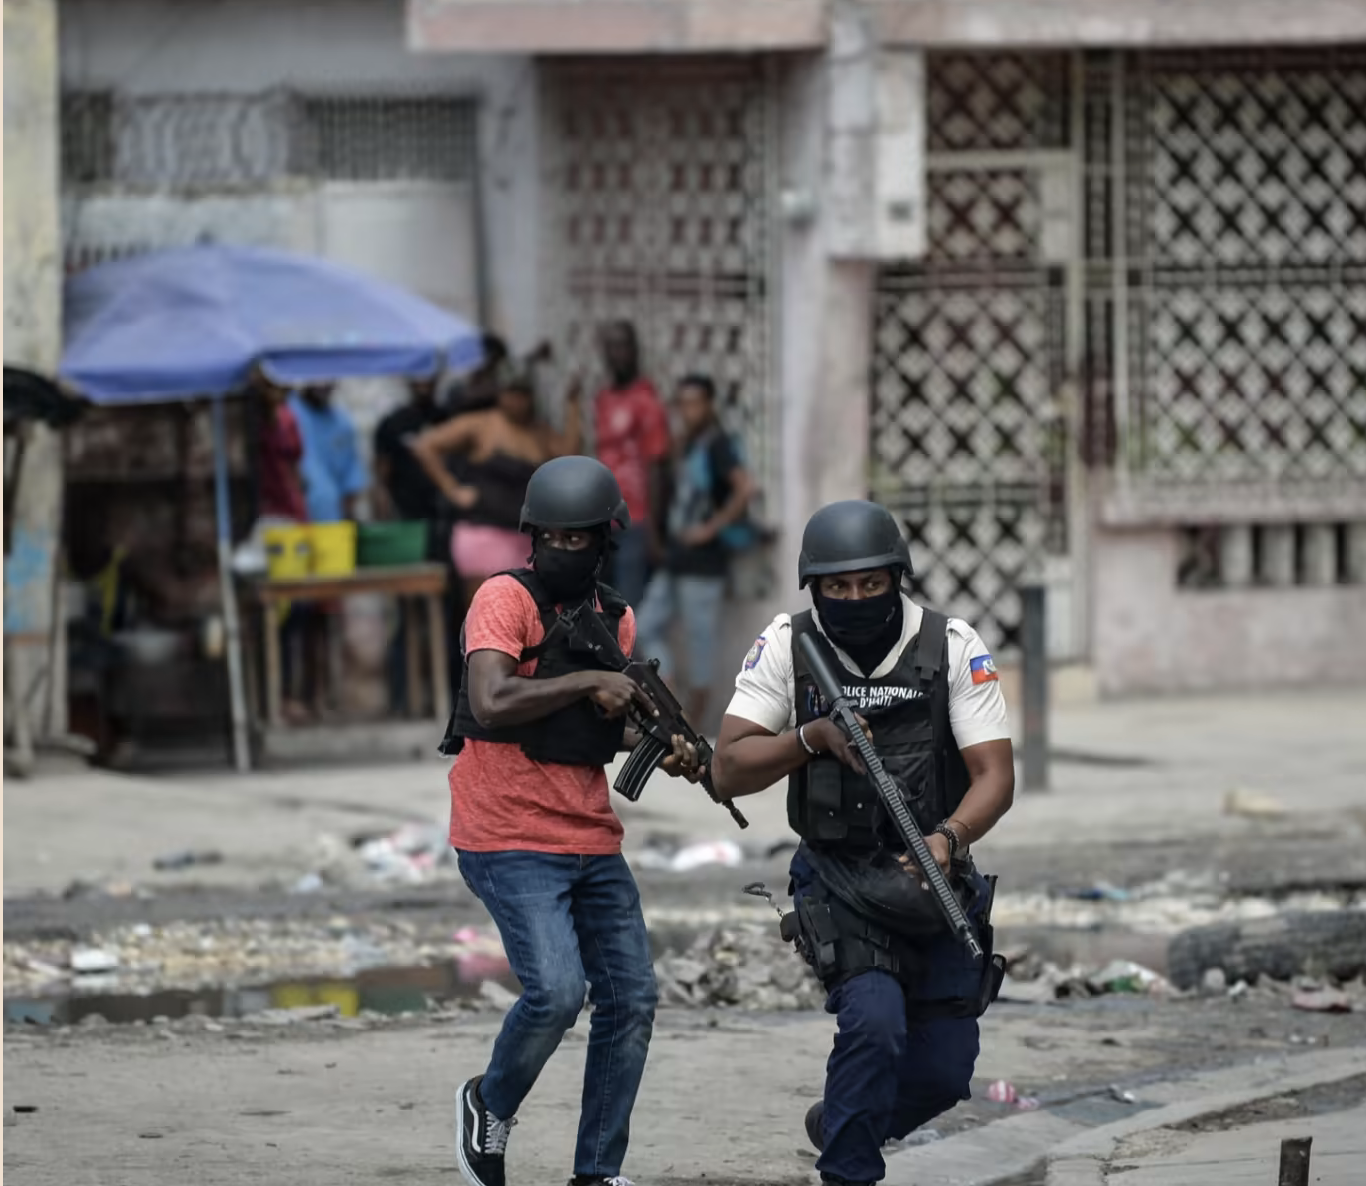 Armed police in action in Port-au-Prince to combat criminal gangs: many nations are wary of becoming involved in a crisis-racked country with deep-rooted problems © Richard Pierrin/AFP/Getty Images